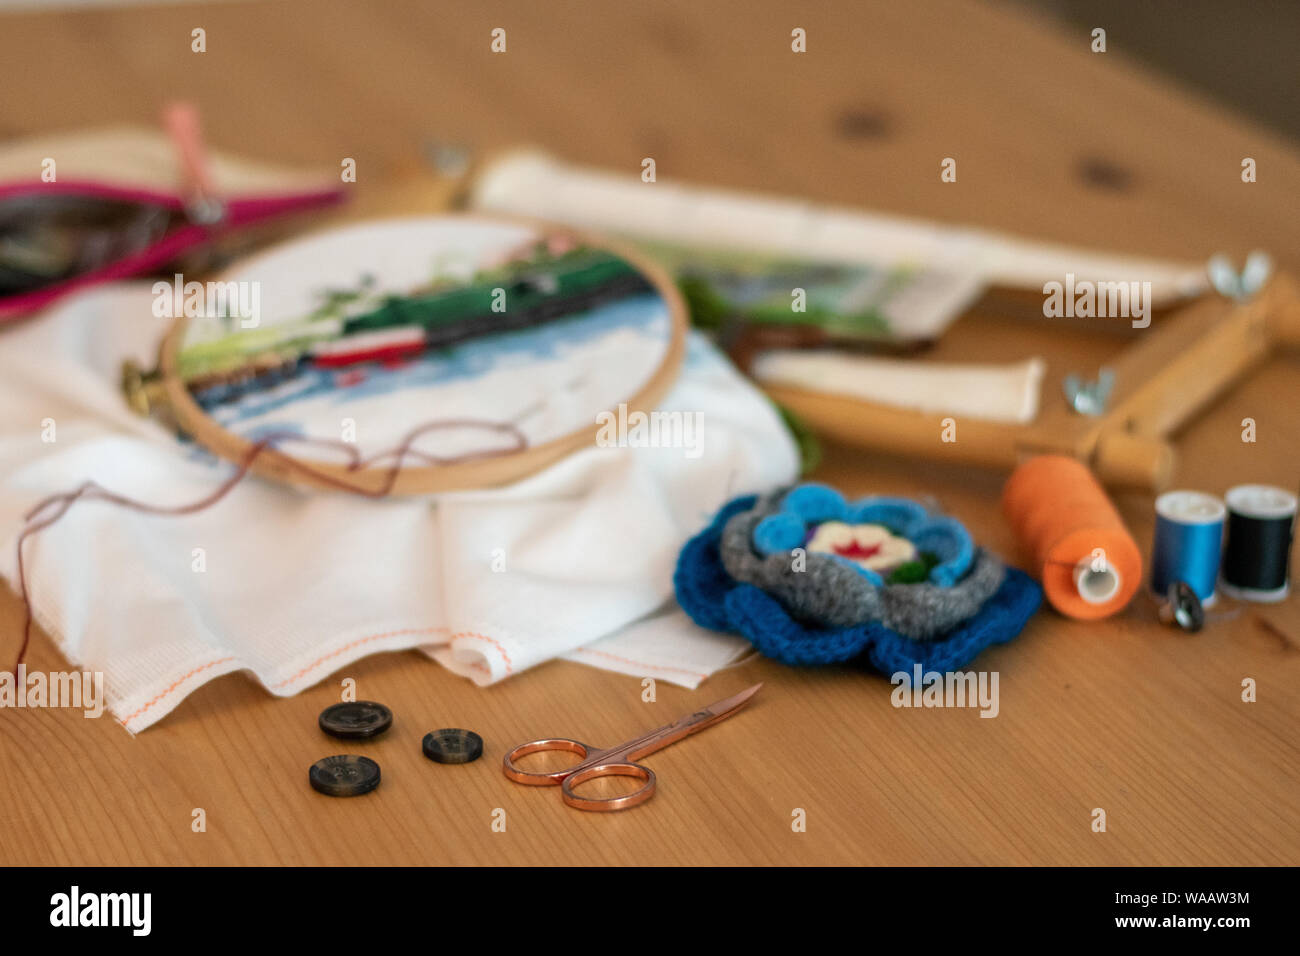 Cross-stitch embroidery materials, including threads, needles, scissors, linen and hoops. laid out on a table for craft/hobby Stock Photo